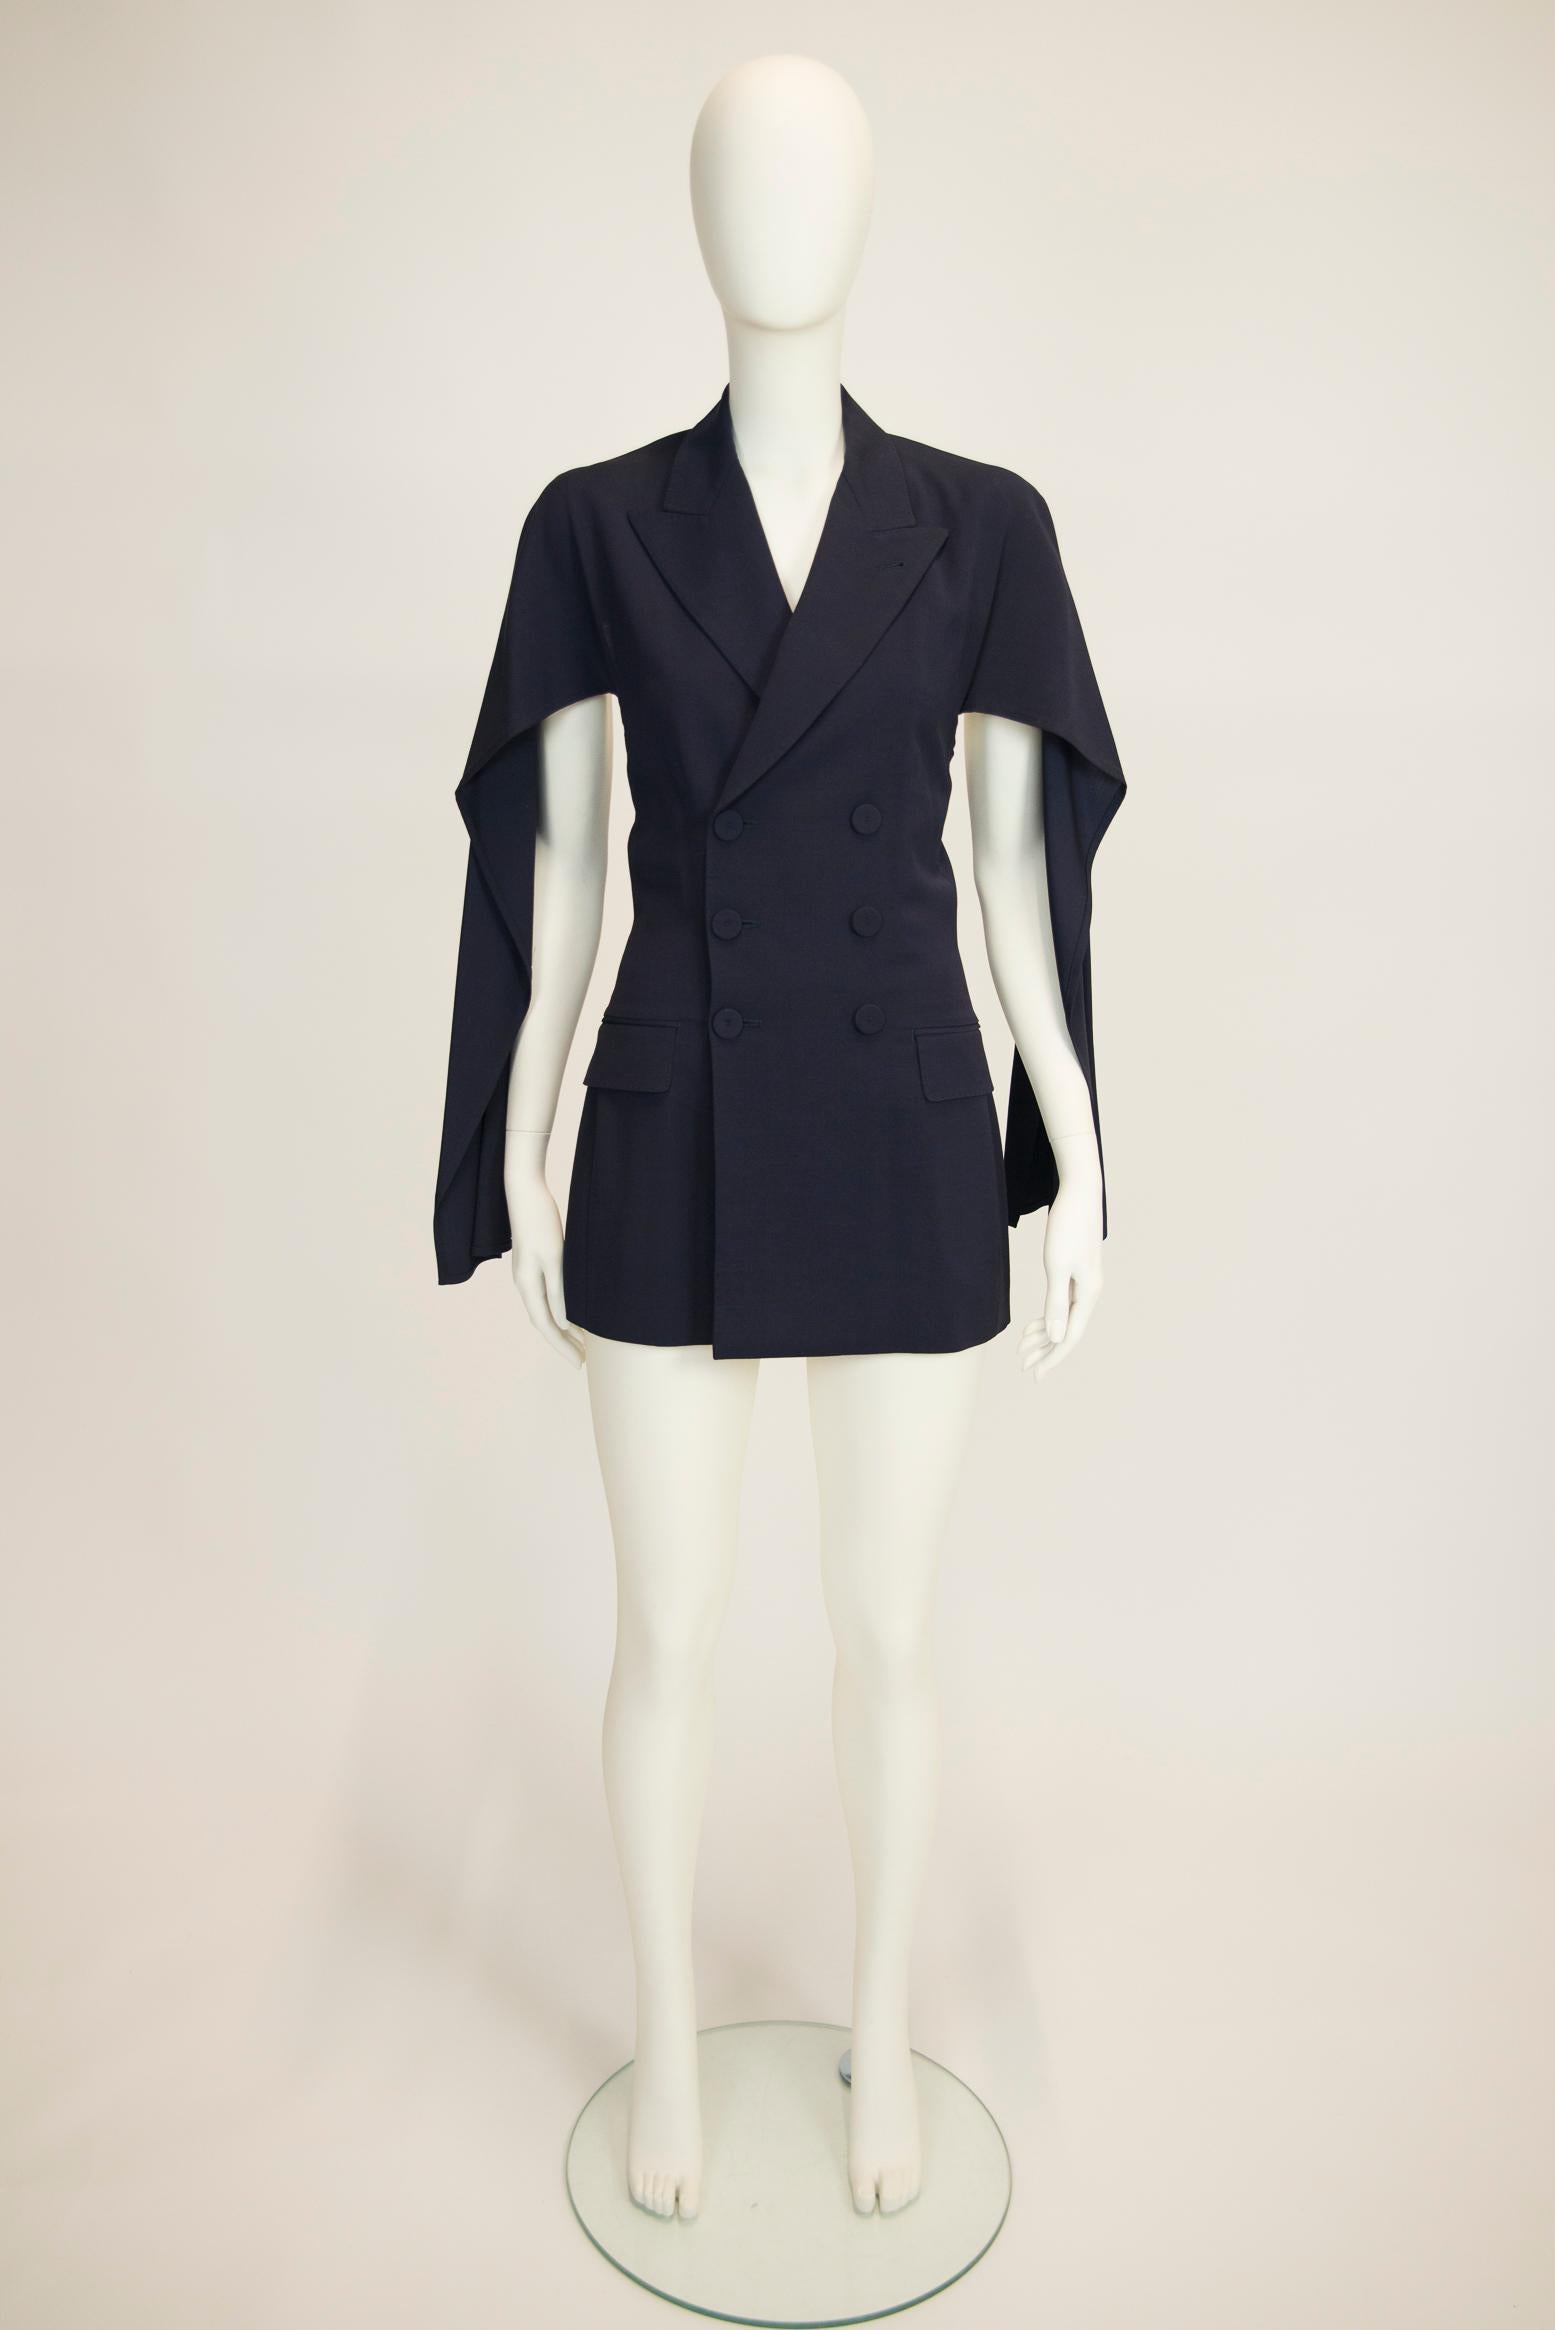 Jean Paul Gaultier's creations always have this unexpected twist that make them both recognizable and unique.
Made of navy wool (49%) and rayon (51%), this double-breasted blazer features a daring open back and slits along the sleeves that create an